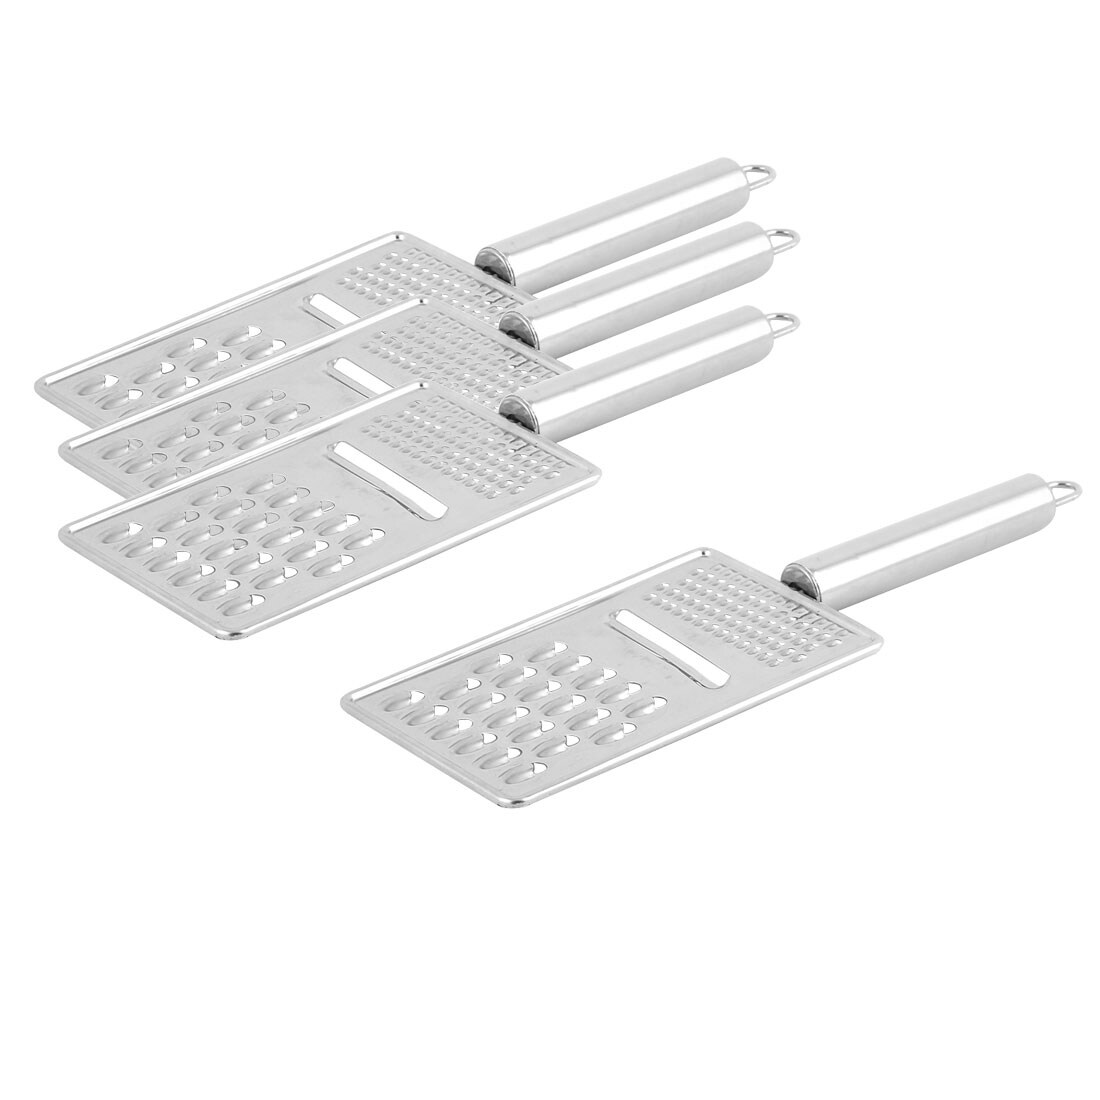 Silver Graters and Slicers - Bed Bath & Beyond